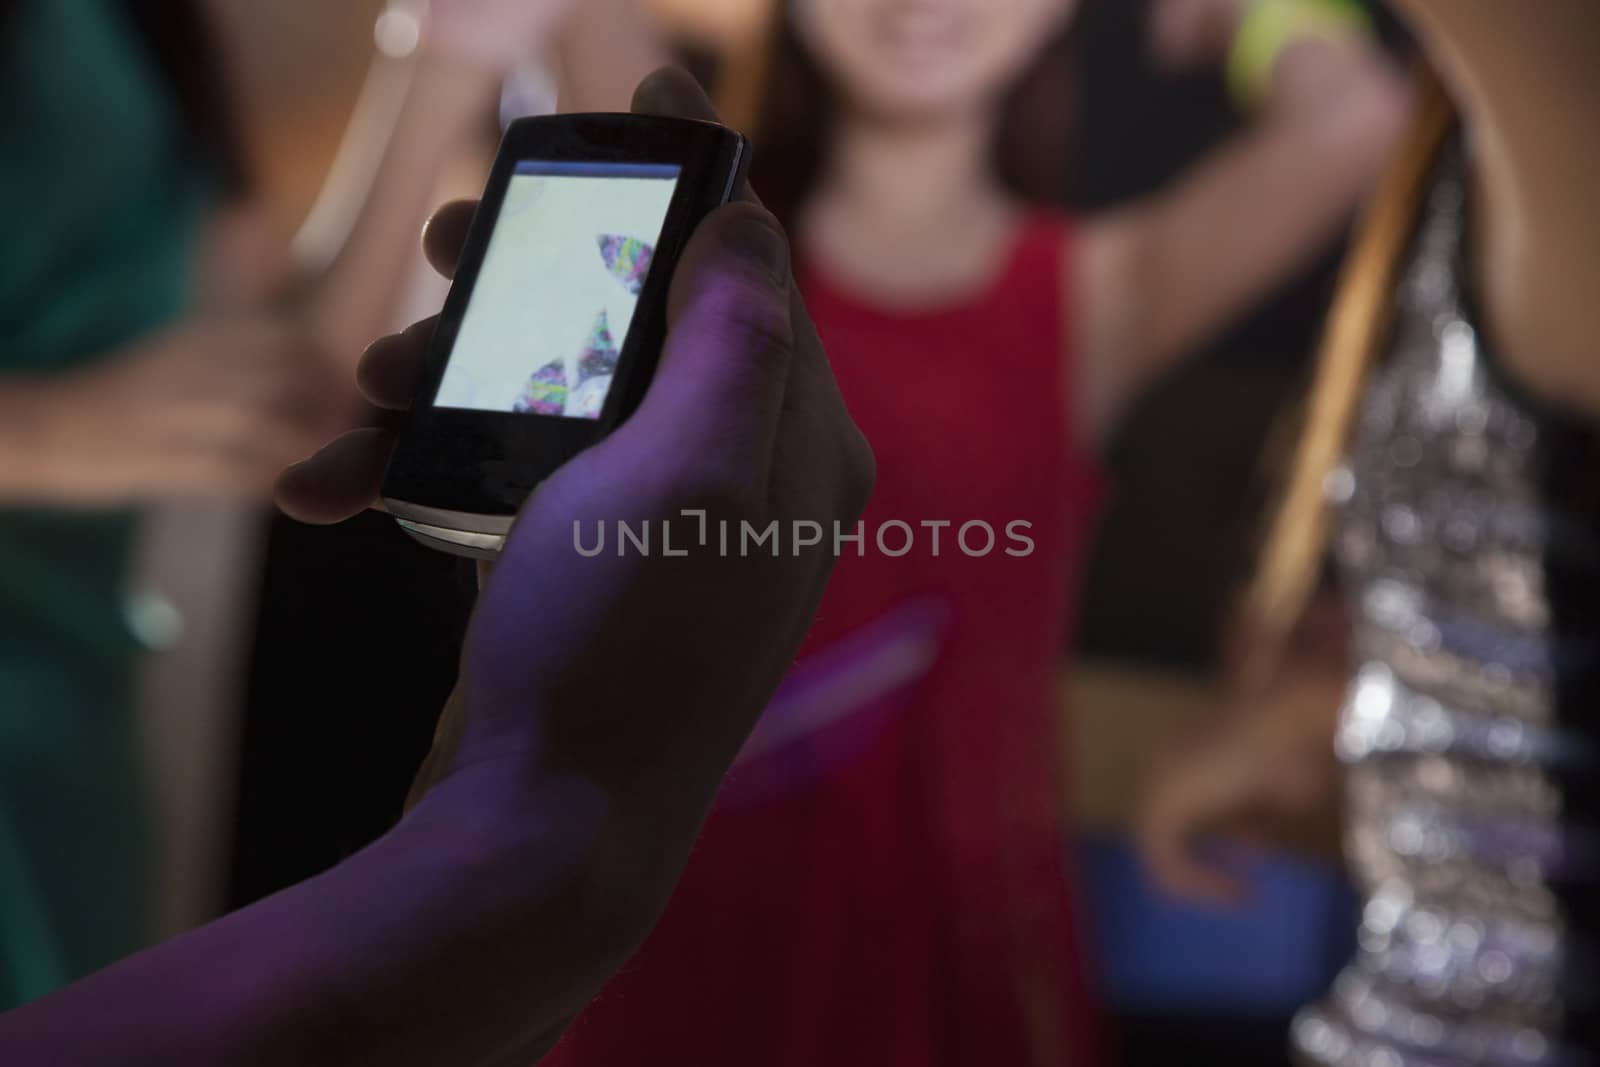 A young man uses a mobile phone in nightclub by XiXinXing